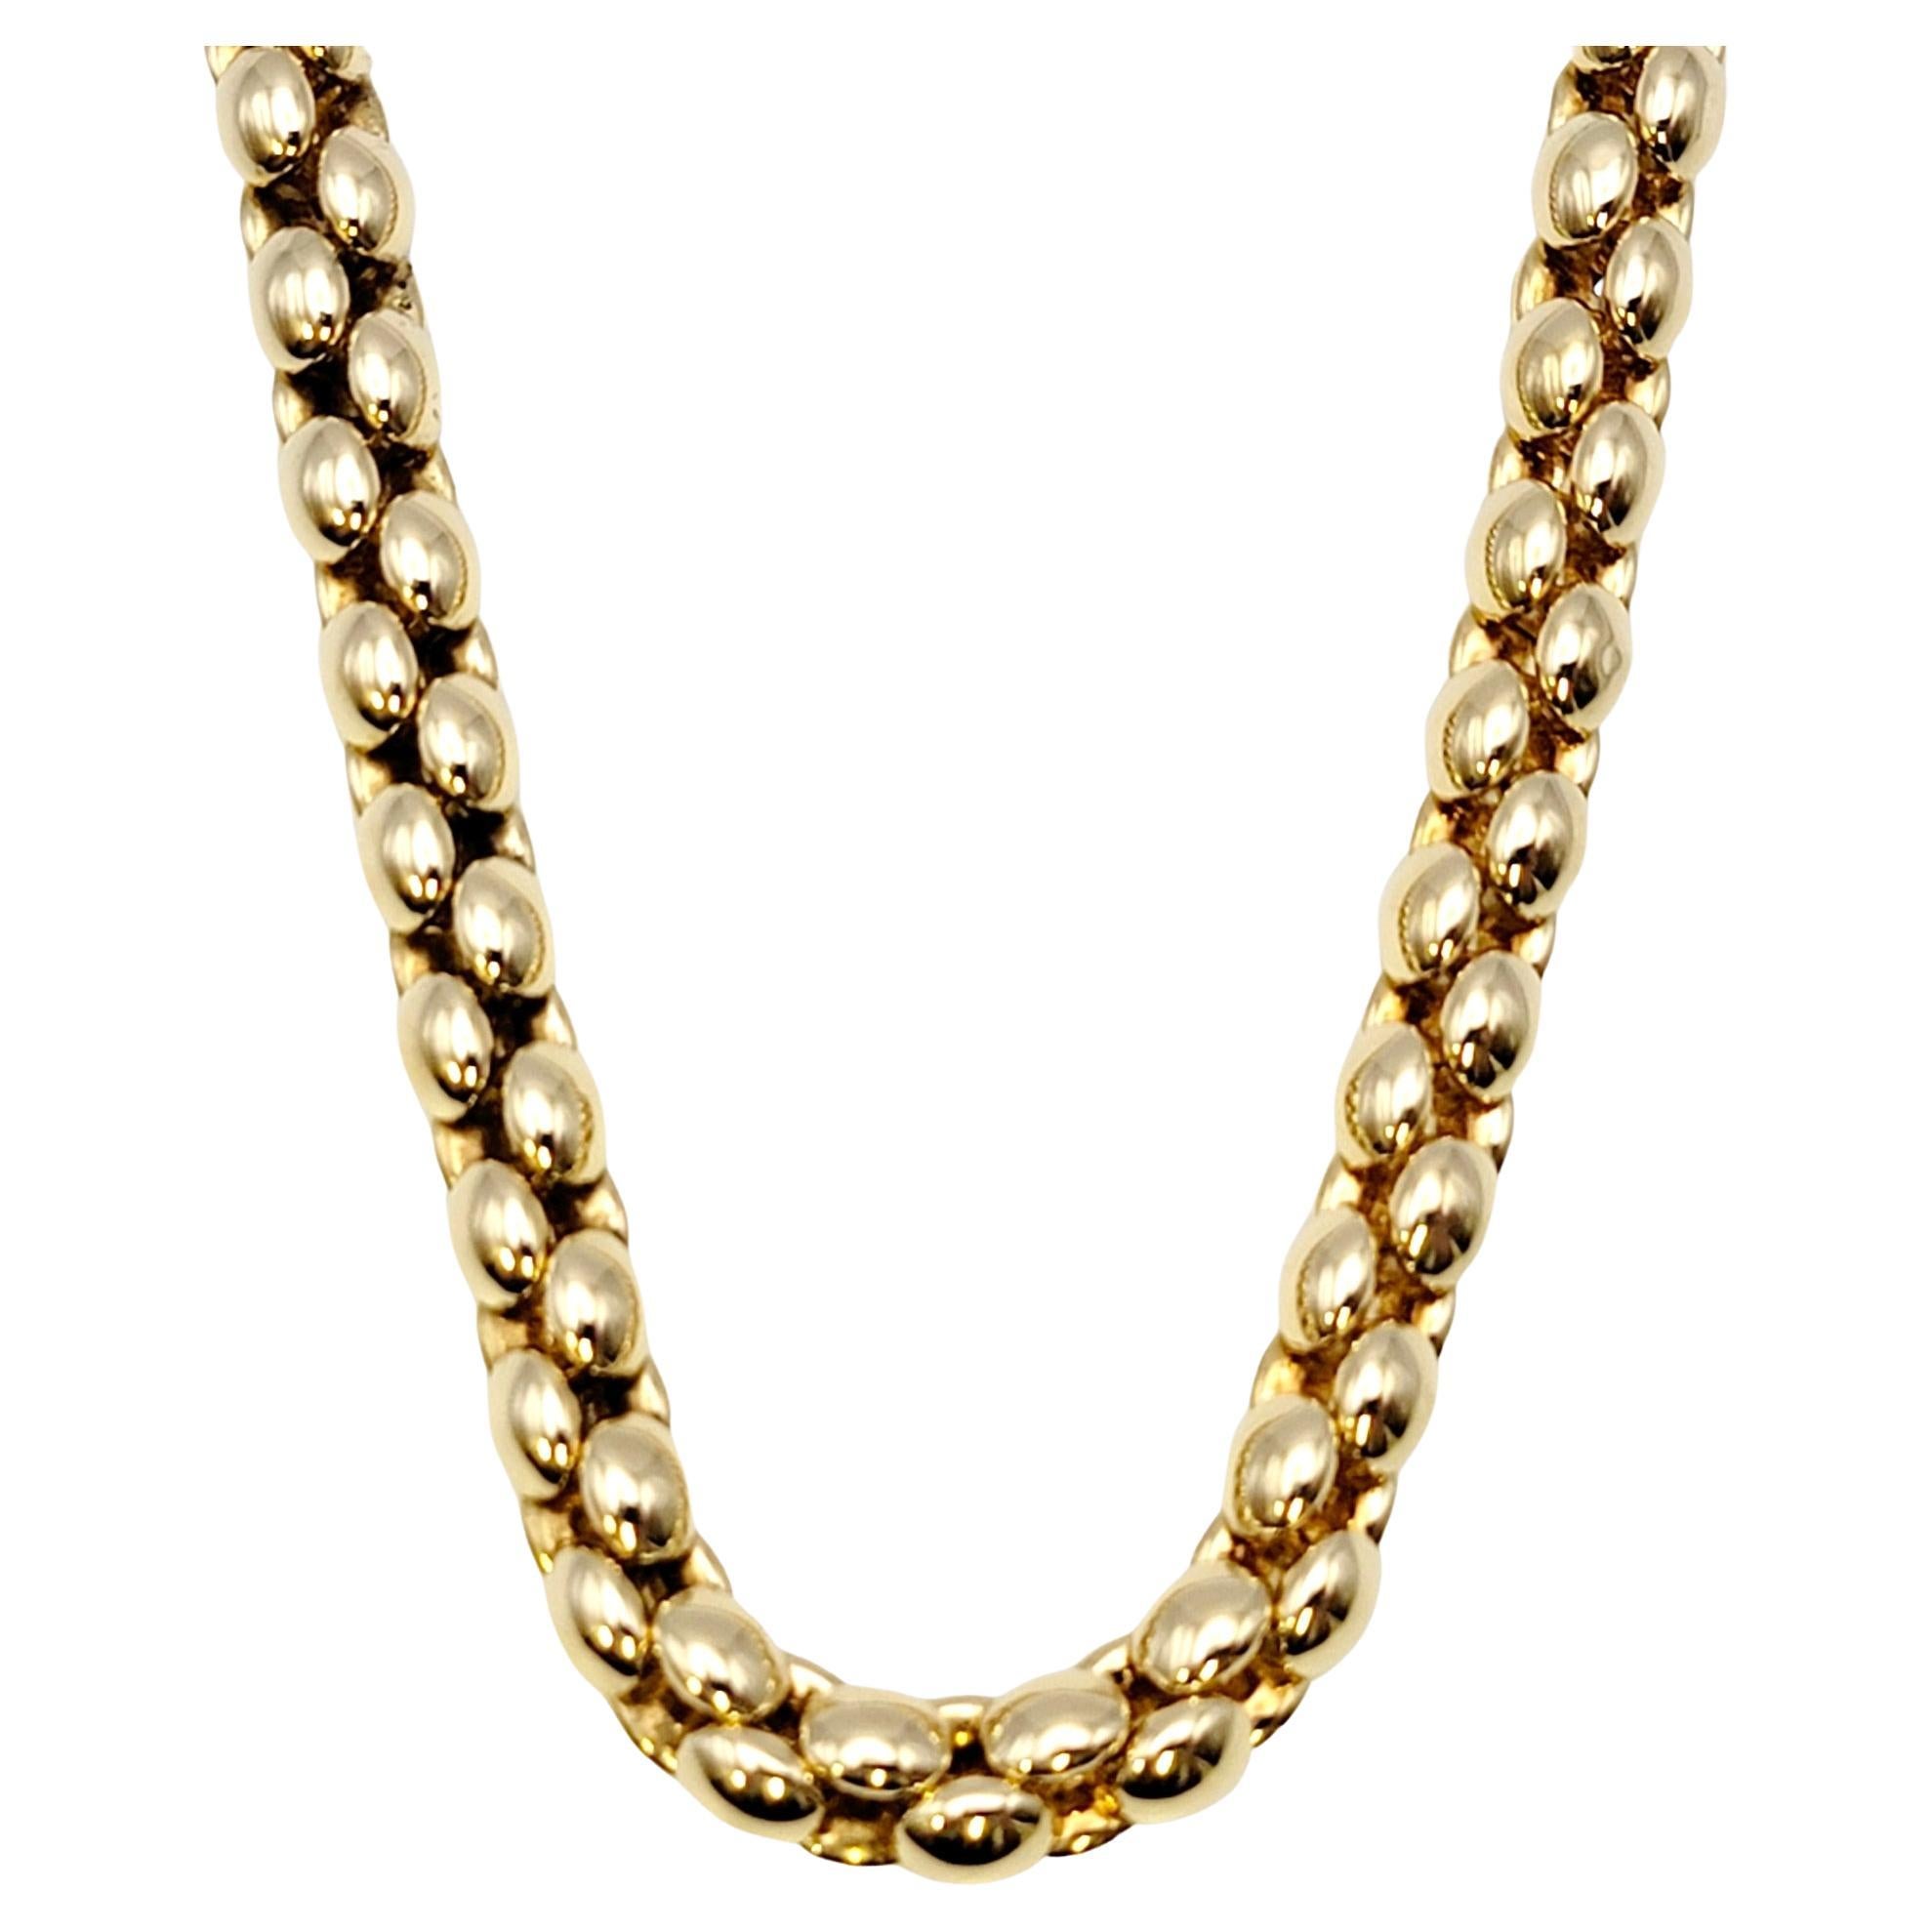 Chiampsean Polished 18 Karat Yellow Gold Chunky Popcorn Chain Necklace For Sale